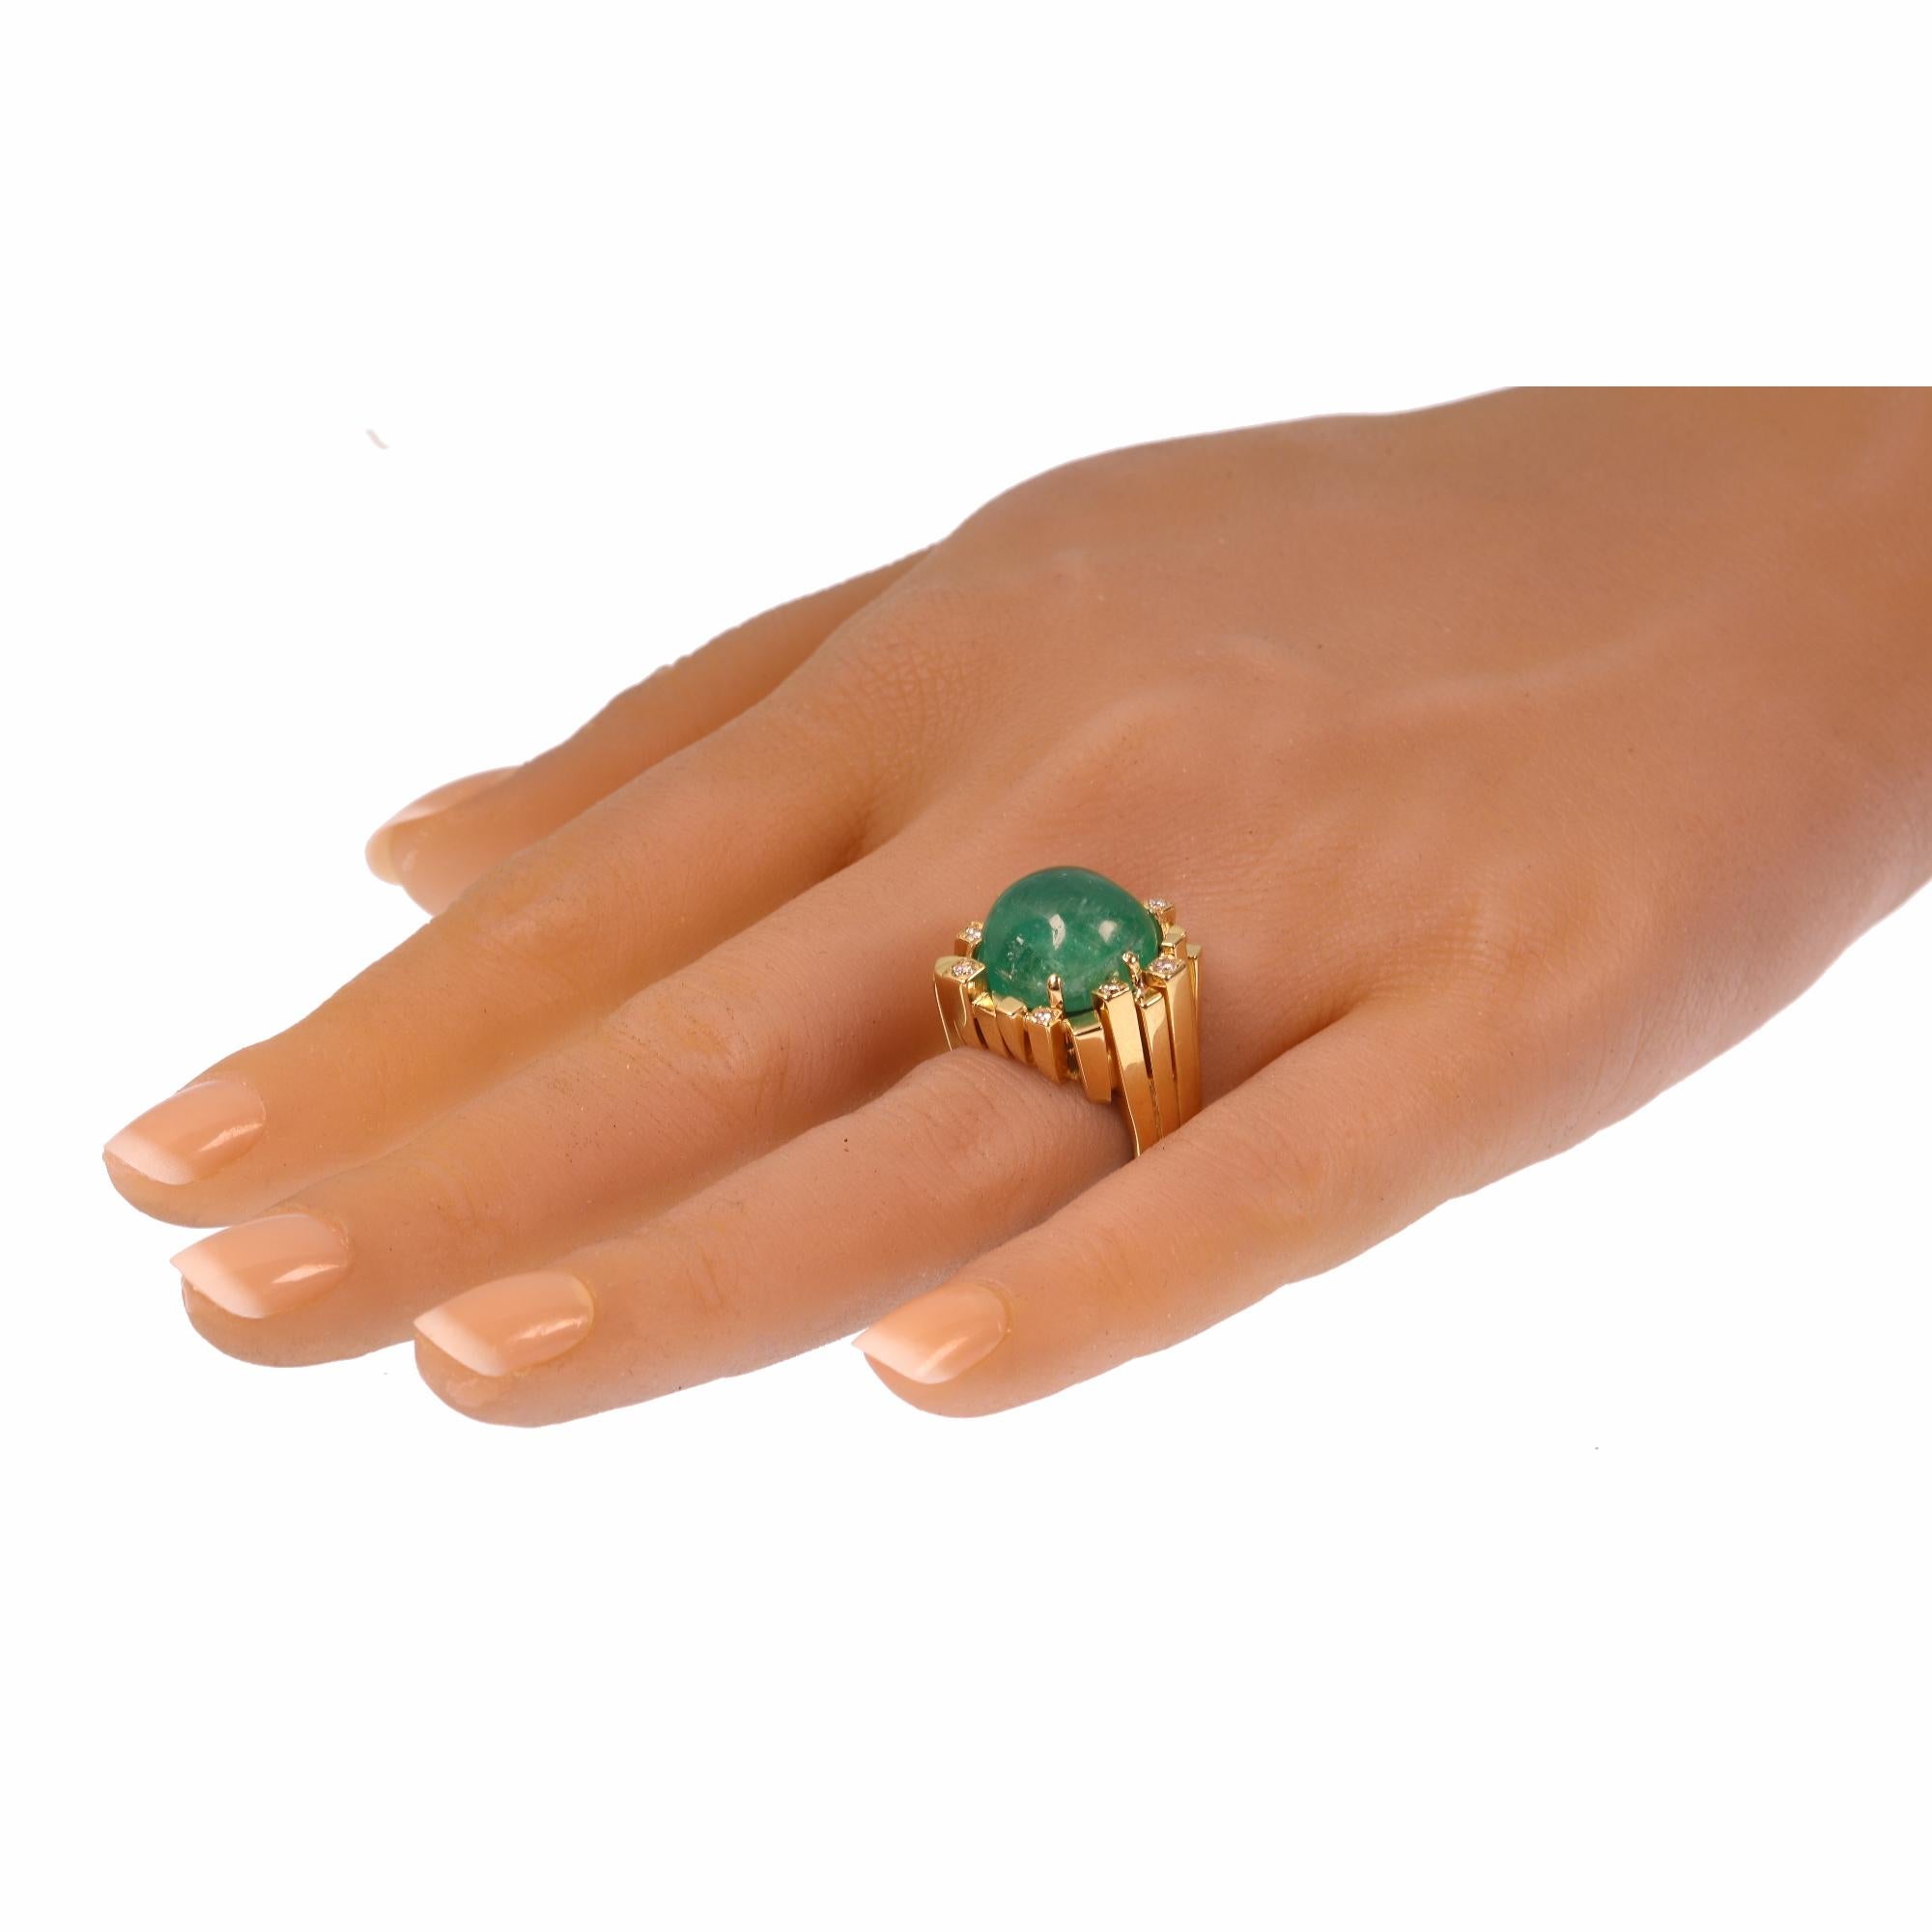 Vintage Seventies Modernistic Artist Design Ring with Large Emerald and Diamonds For Sale 10